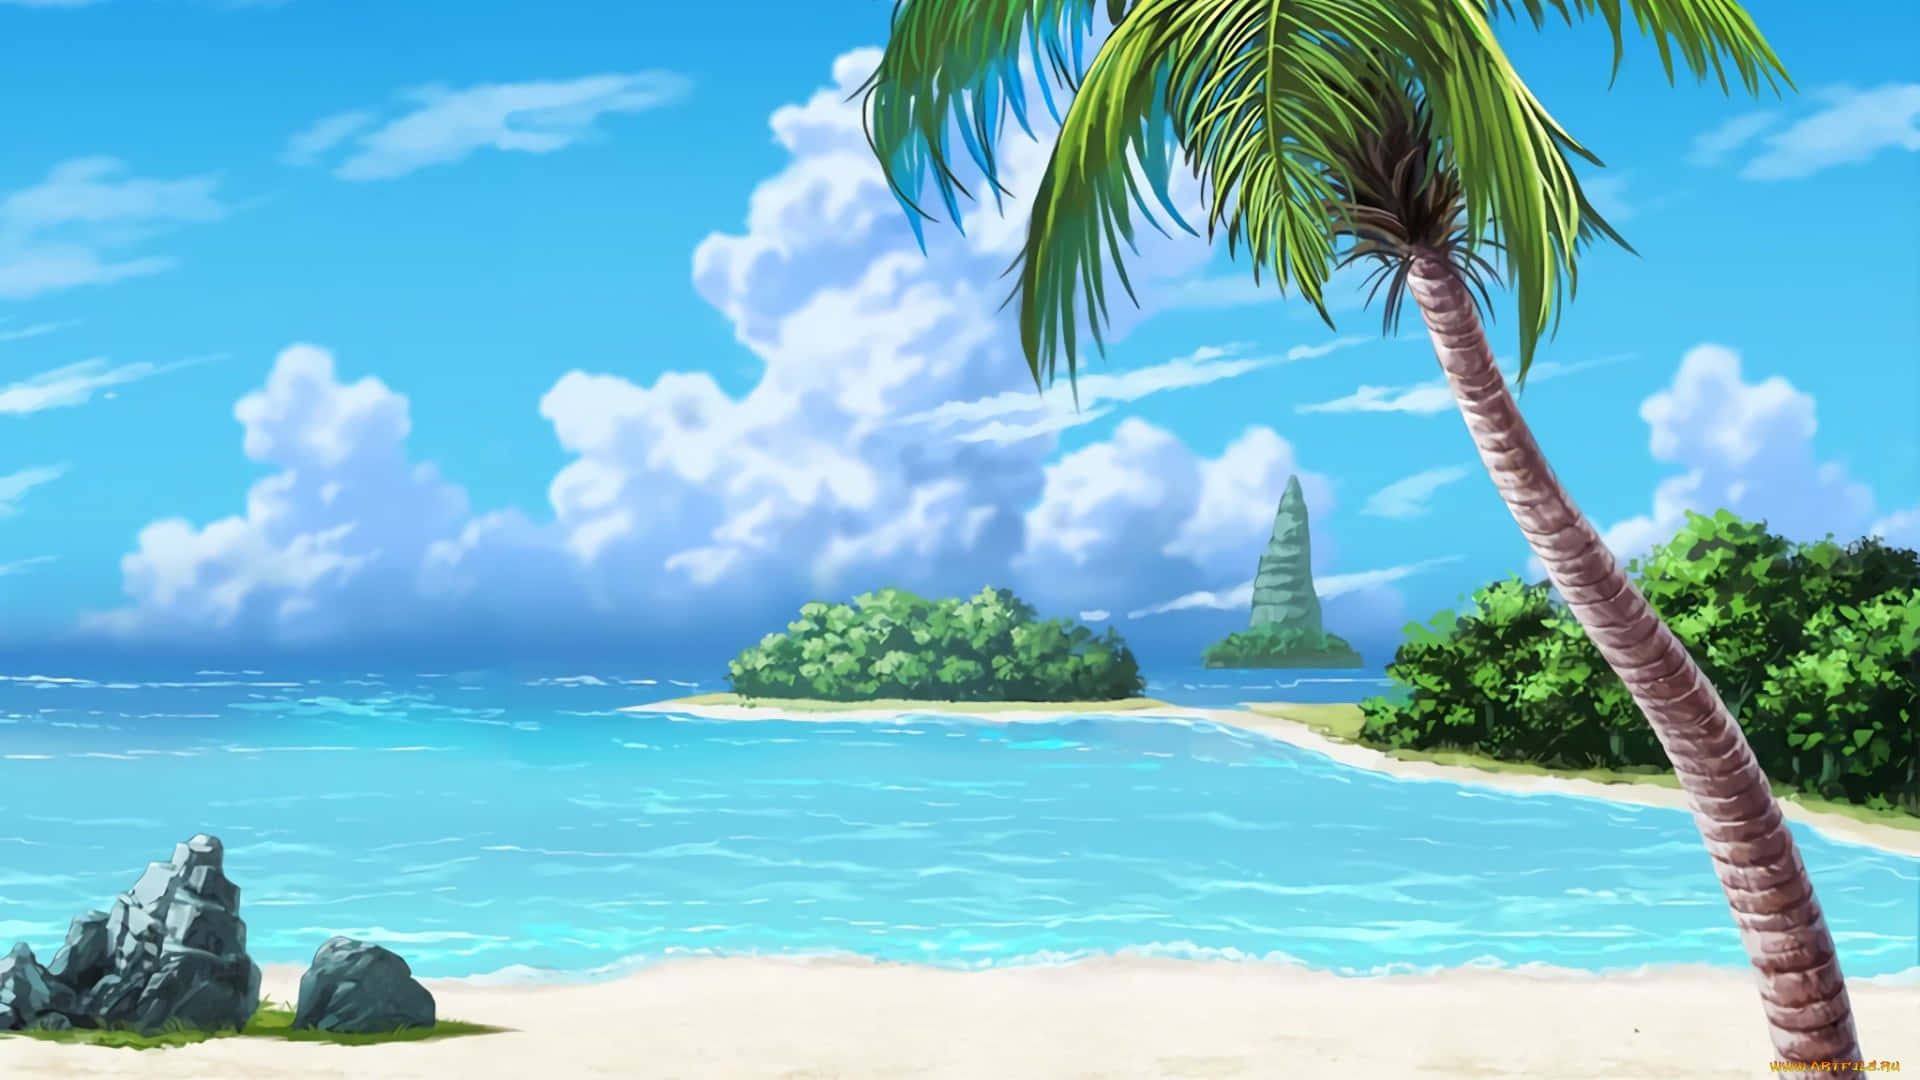 Free Anime Beach Background - Download in Illustrator, EPS, SVG, JPG, PNG |  Template.net